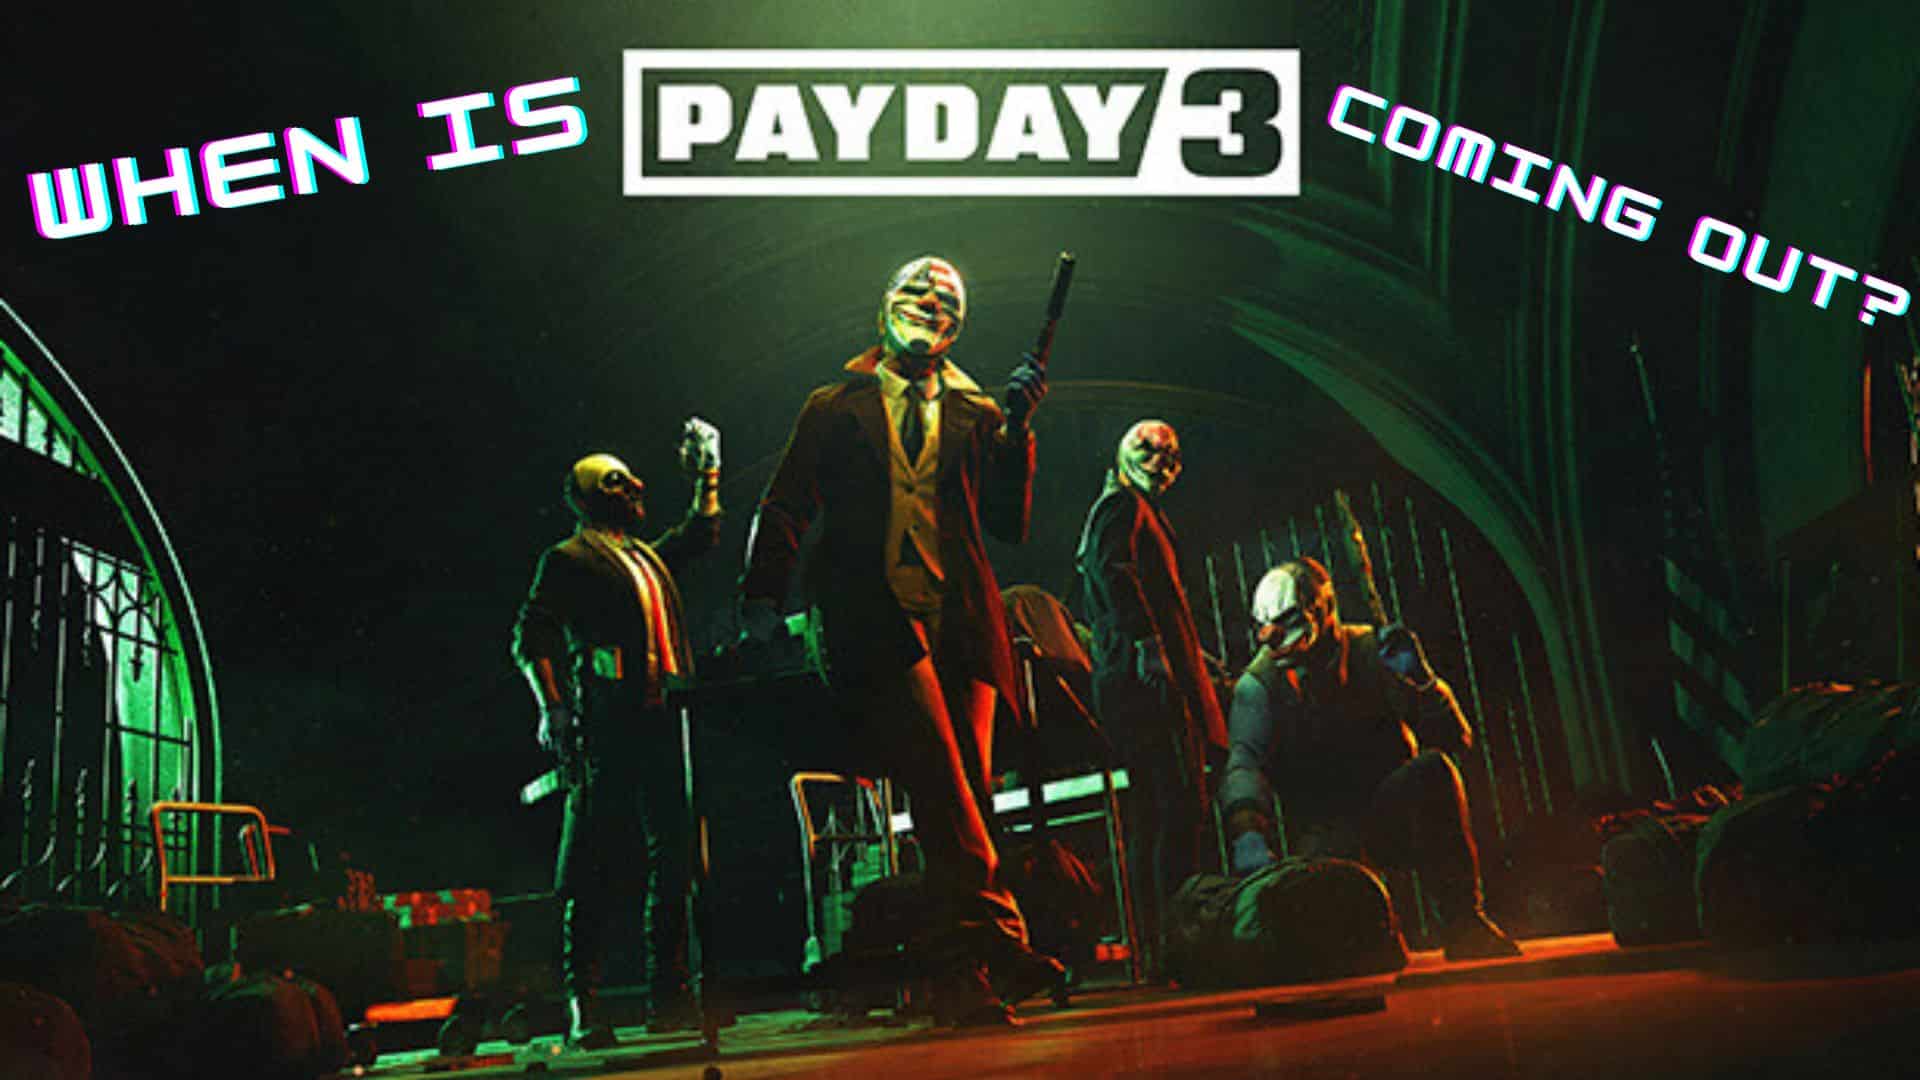 When is Payday 3 coming out